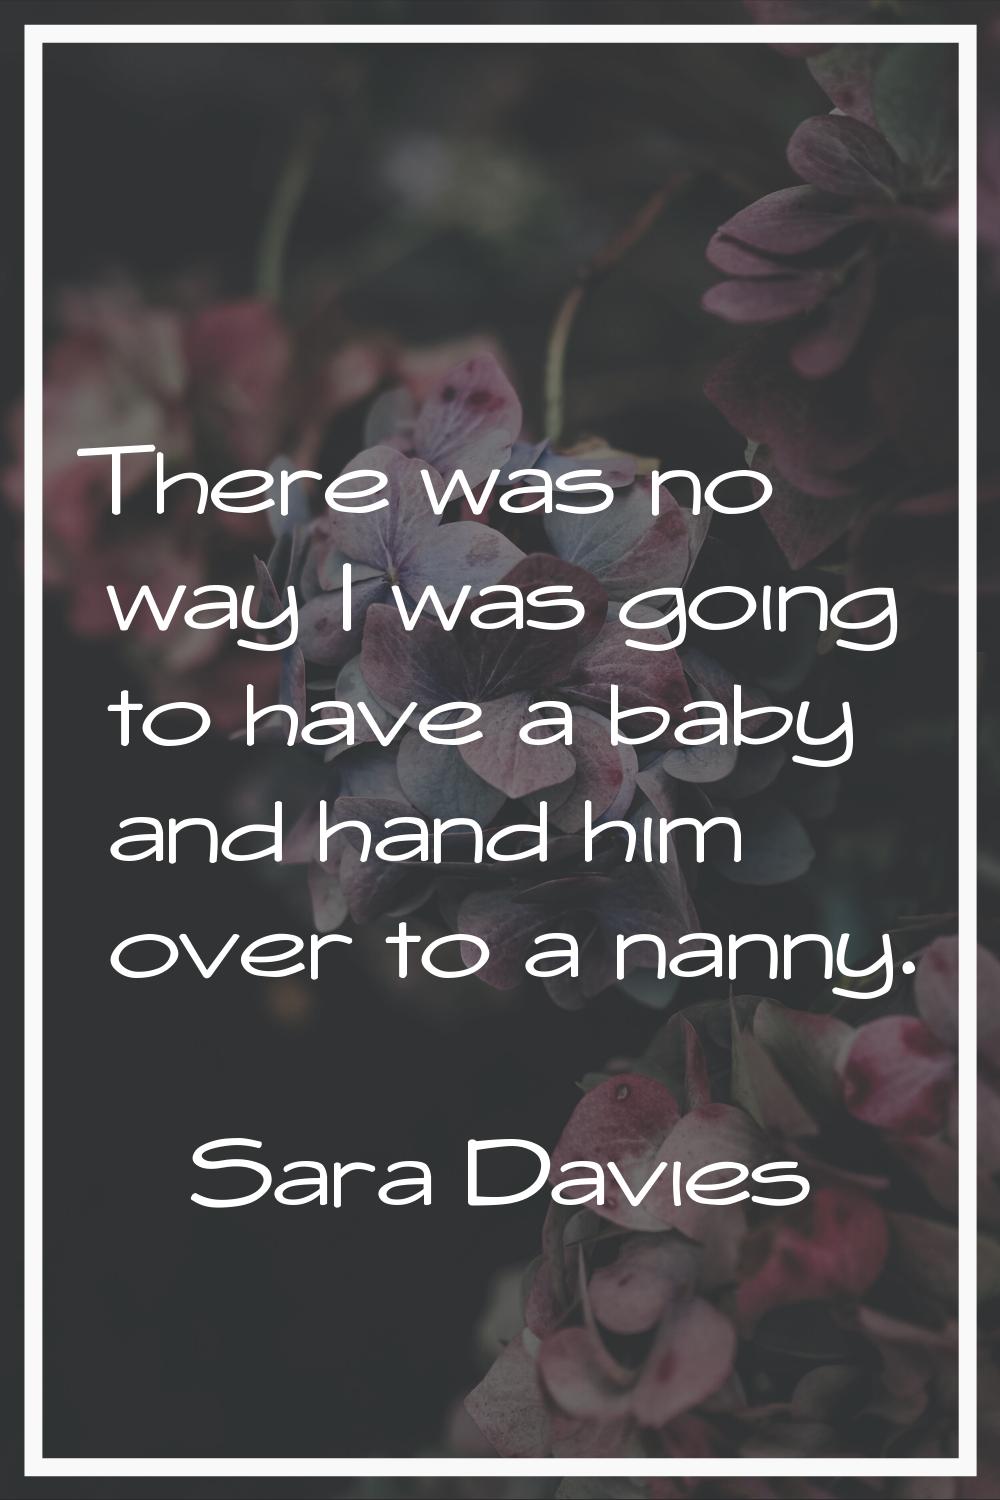 There was no way I was going to have a baby and hand him over to a nanny.